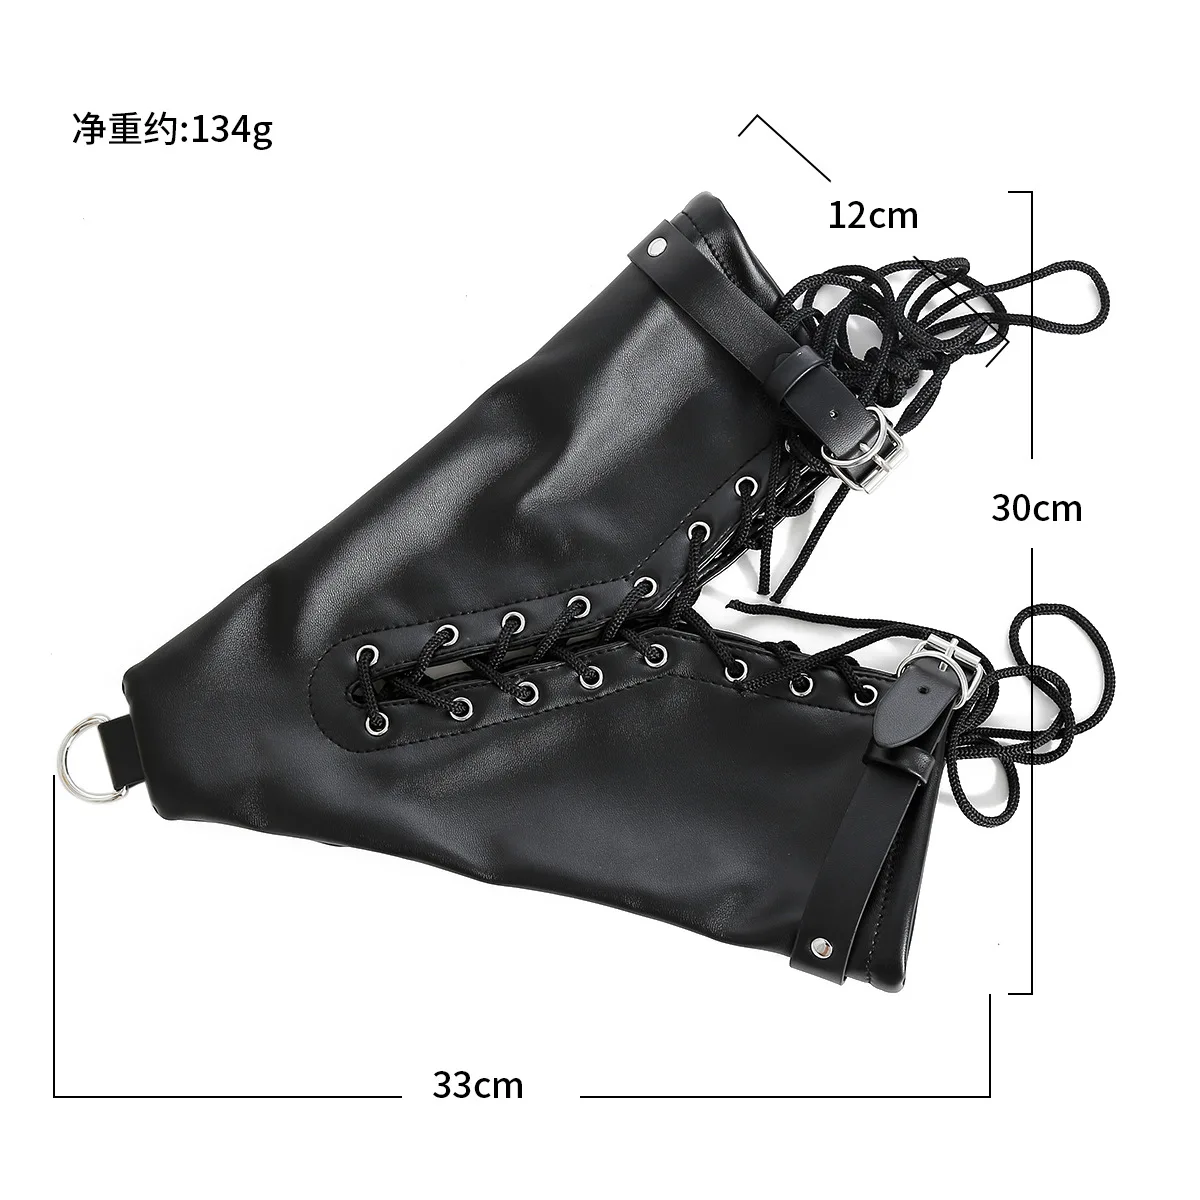 Sex Handcuffs Mittens Boot Booties Leather Gloves Dog Paw Padded Fist Mitts Socks BDSM Bondage Sex Toys Fun Gloves Adult Game